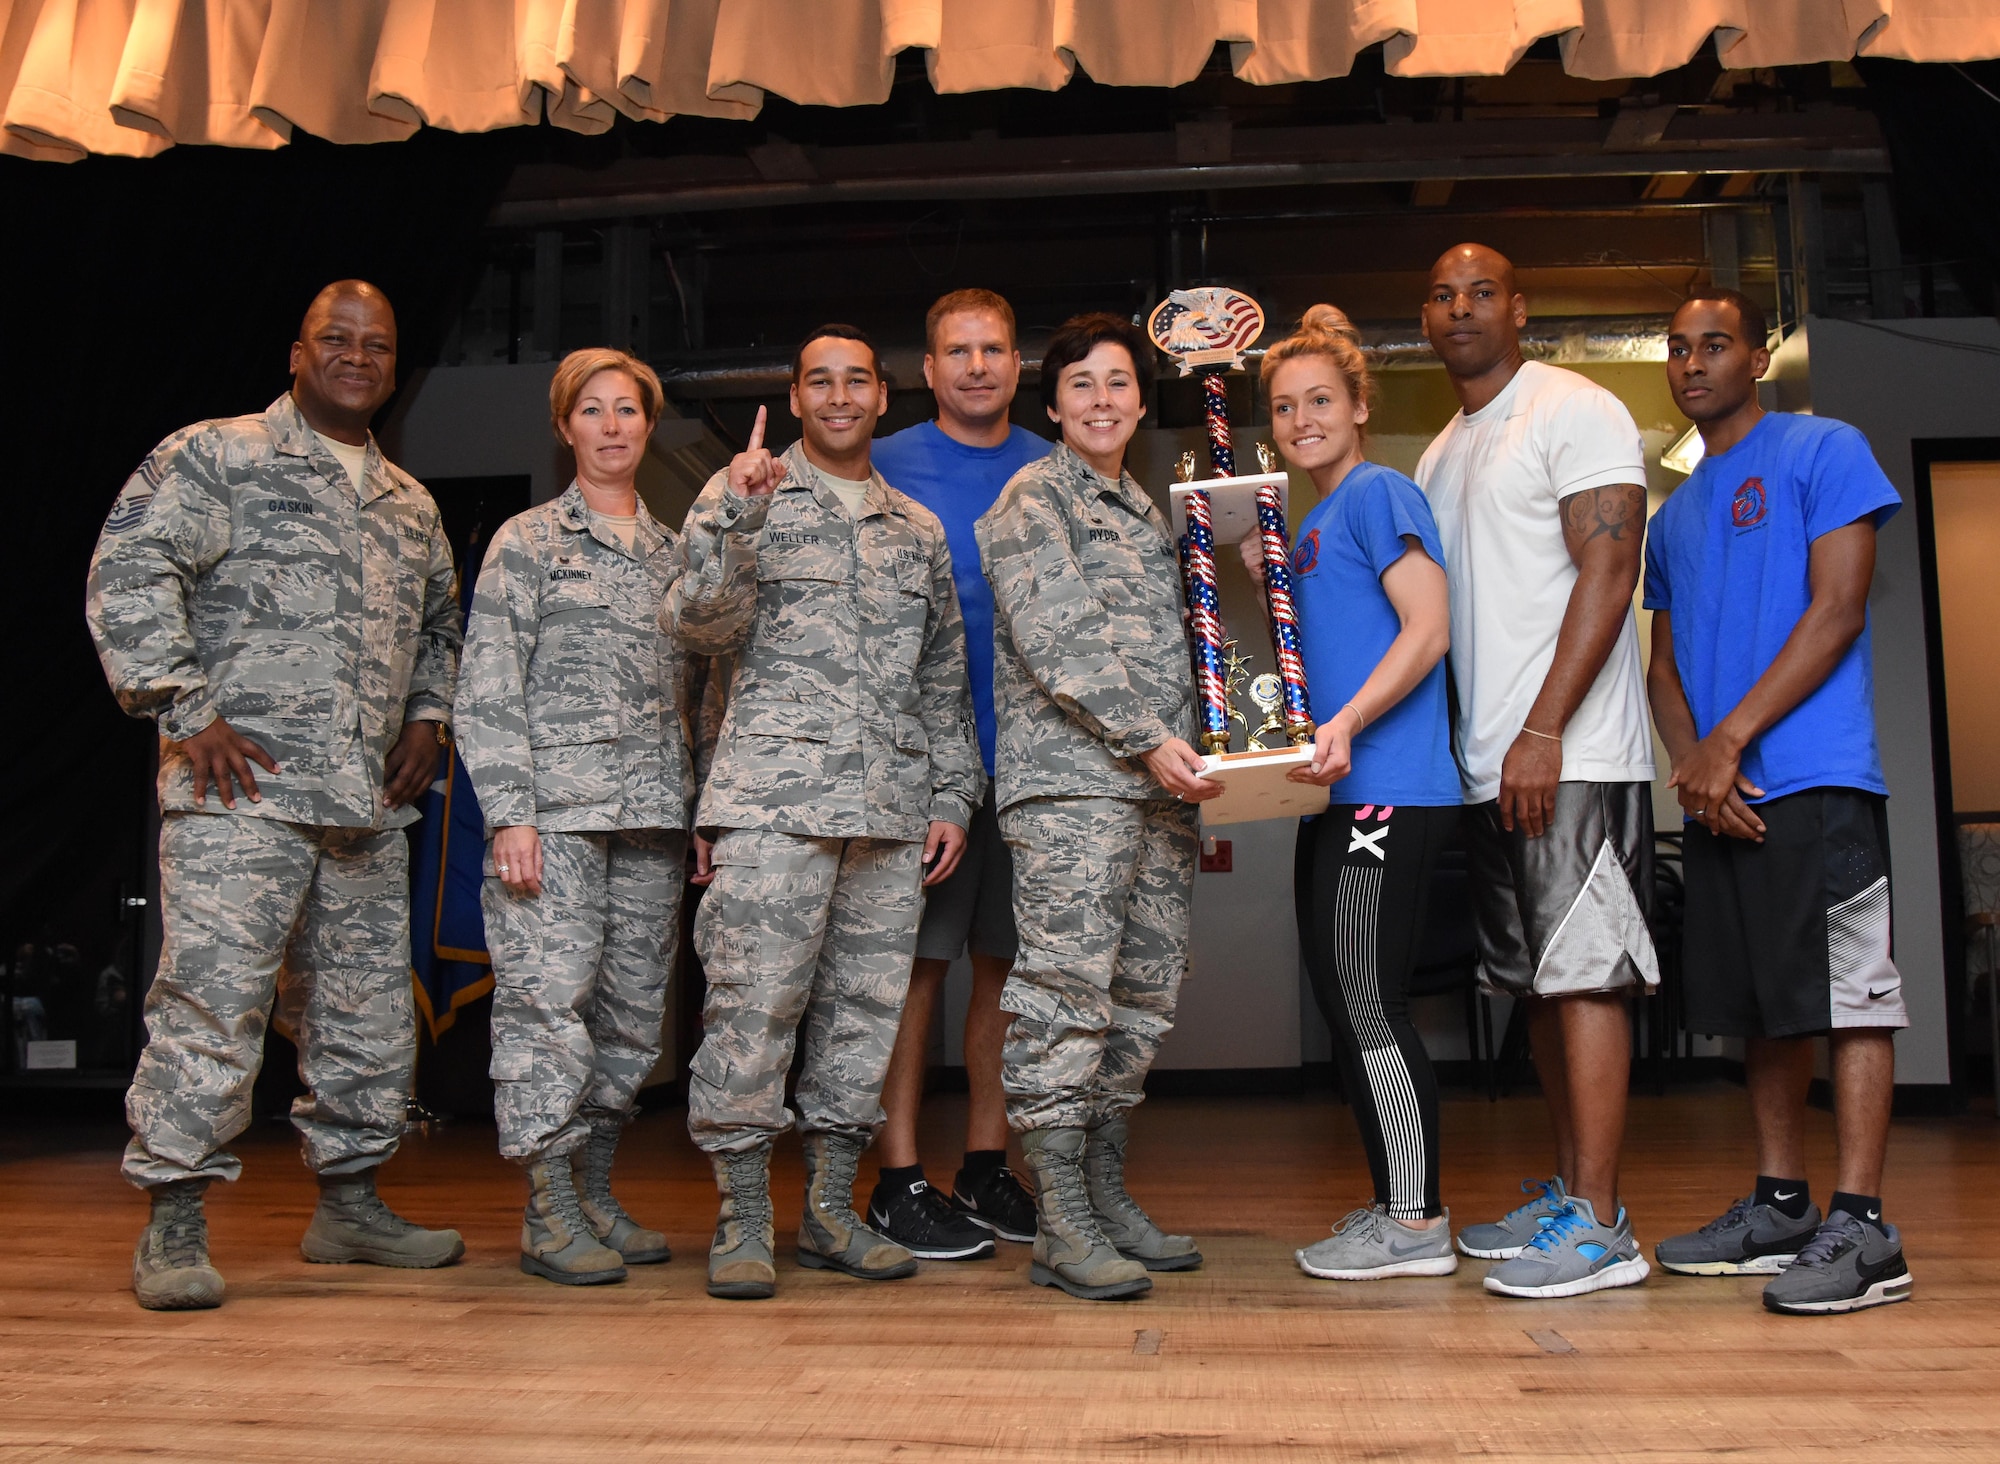 Members of the 81st Dental Squadron are presented the first place trophy by Col. Jeannine Ryder, 81st Medical Group commander, during the 81st MDG Push-up Competition at the Keesler Medical Center Don Wylie Auditorium Nov. 1, 2016, on Keesler Air Force Base, Miss. Seven five-person teams competed in the event pushing out a total of 6,272 push-ups. The 81st Dental Squadron accumulated 1,127 push-ups. The Airmen who participated in the event raised money to support the Krewe of Medics Mardi Gras Ball. (U.S. Air Force photo by Kemberly Groue/Released)
